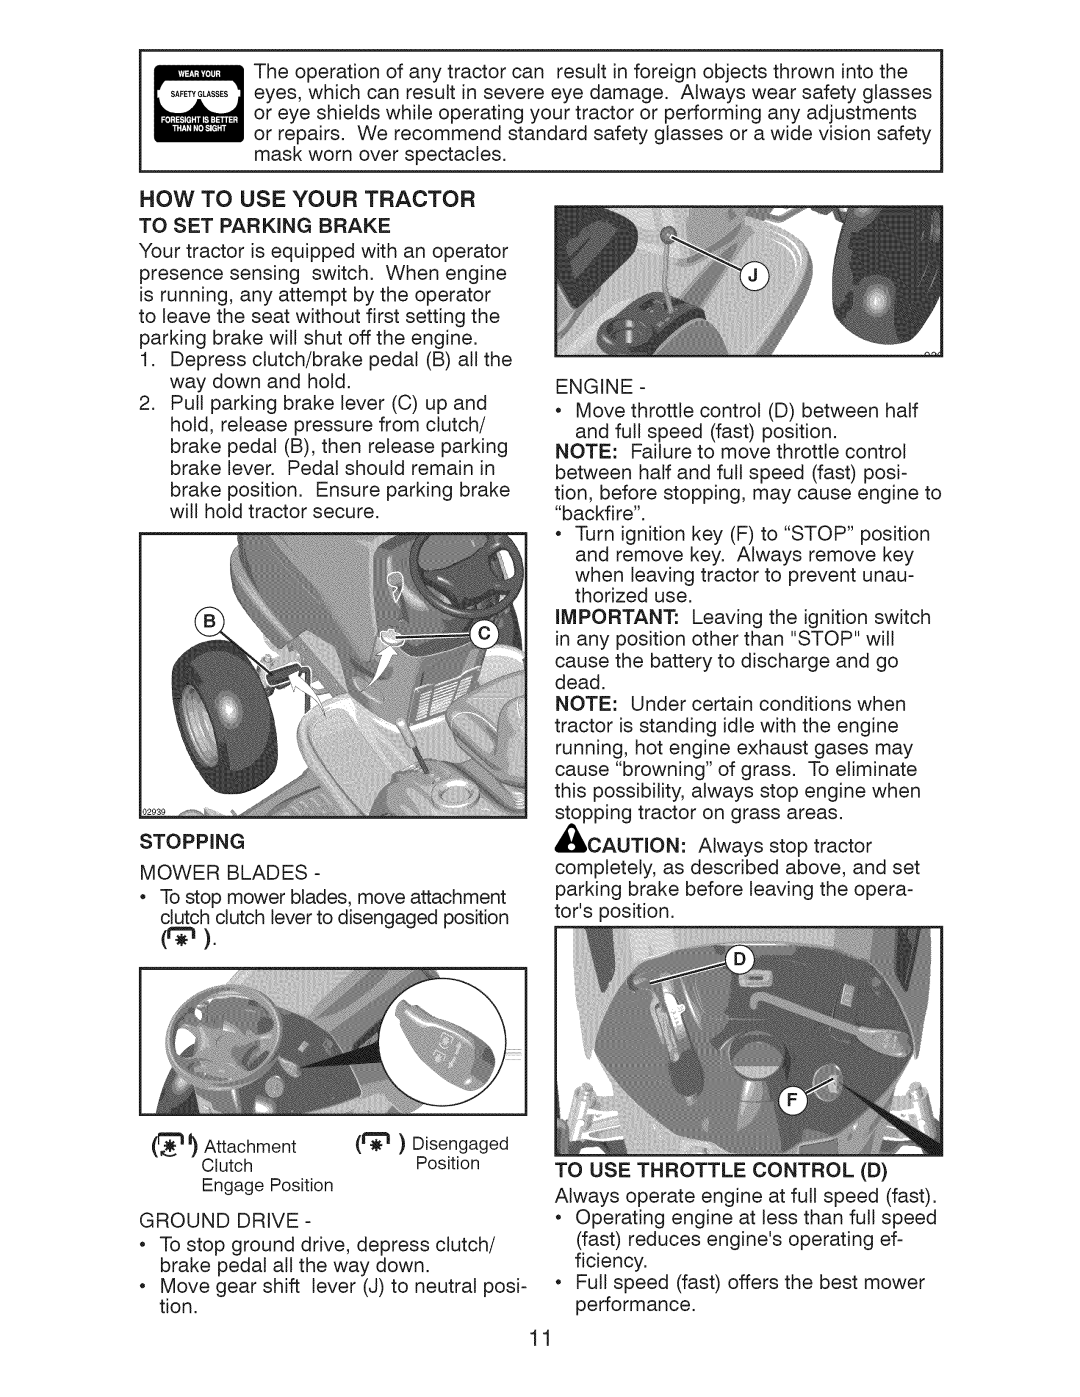 Craftsman 917.289253, 917.289250, 917.289251 owner manual How To Use Your Tractor, To Set Parking Brake, Stopping 